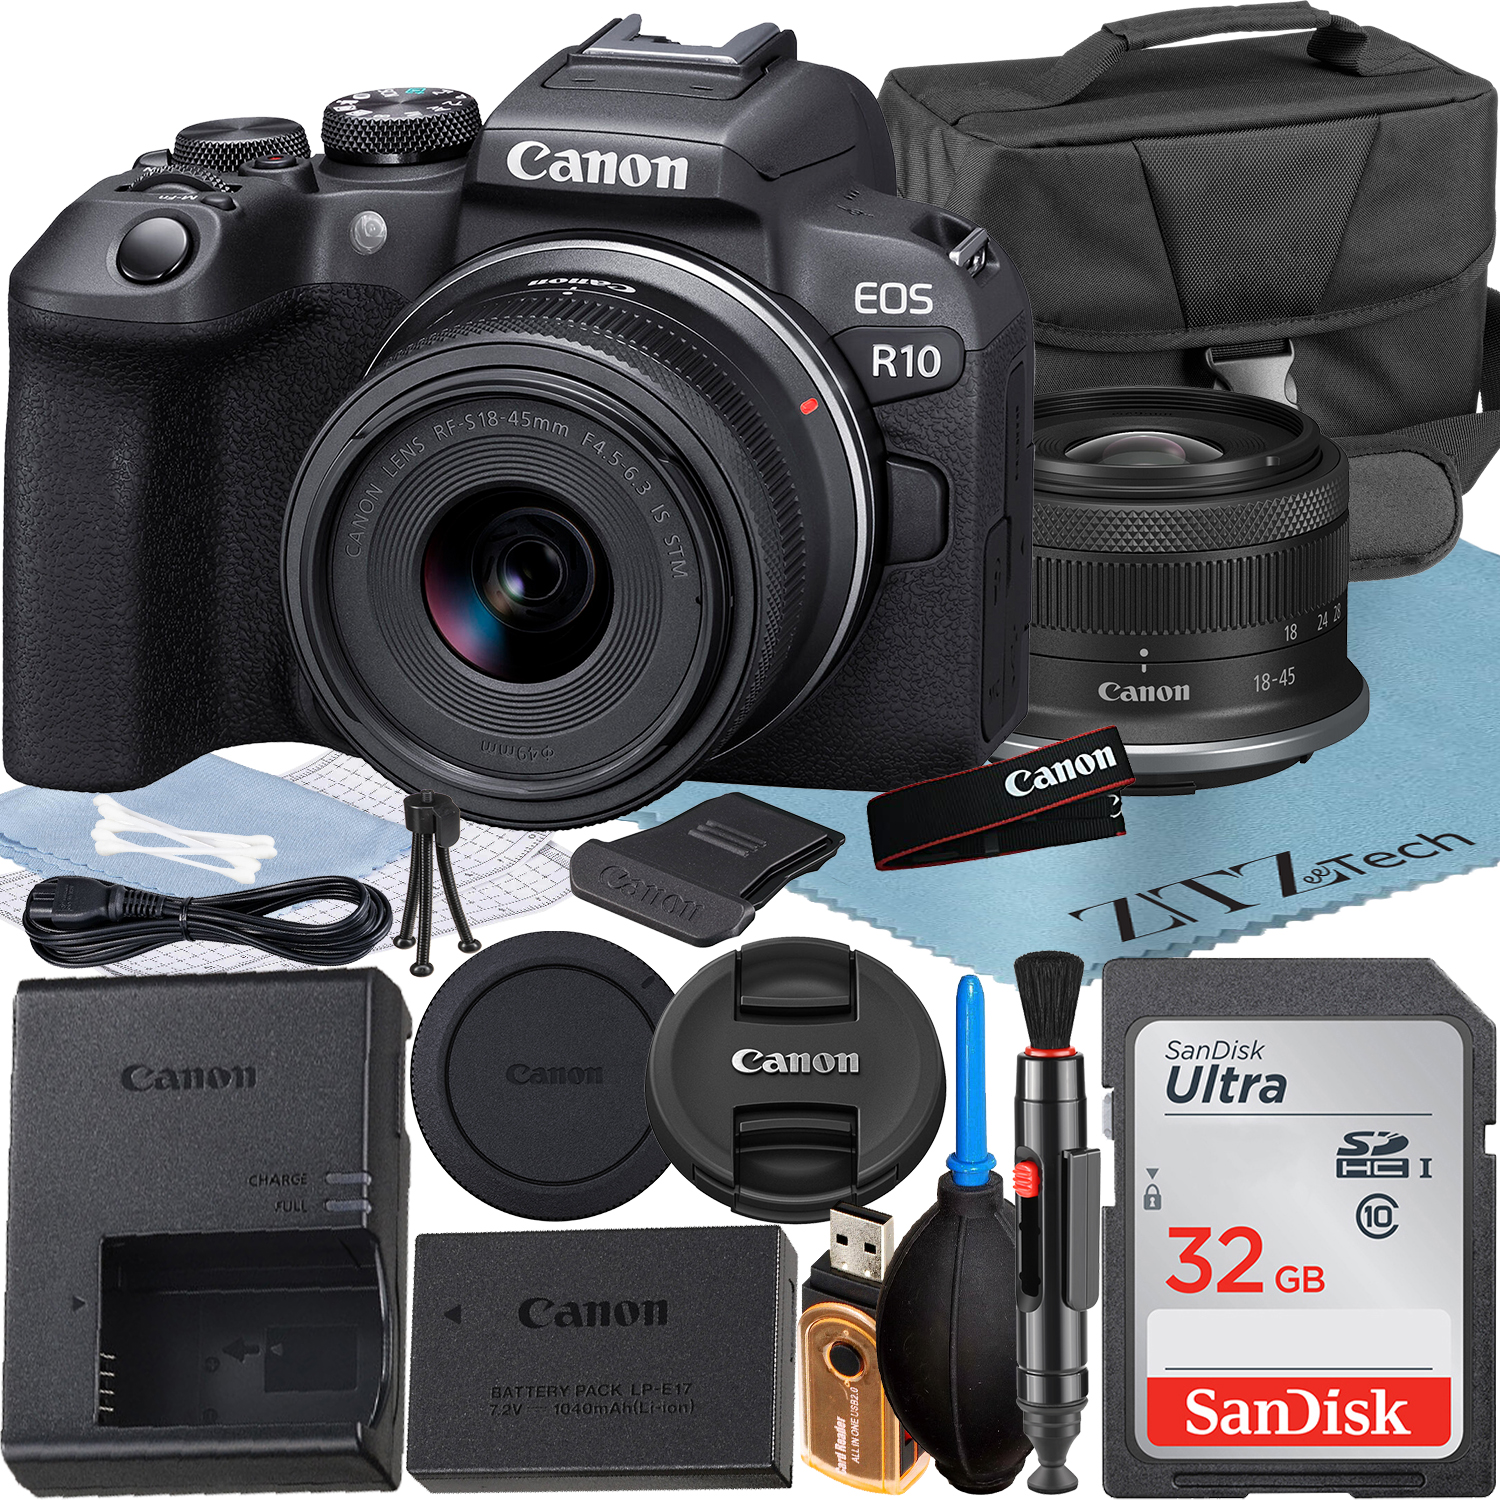 Canon EOS R10 Mirrorless Camera with RF-S 18-45mm Lens + SanDisk 32GB Memory Card + Case + ZeeTech Accessory Bundle